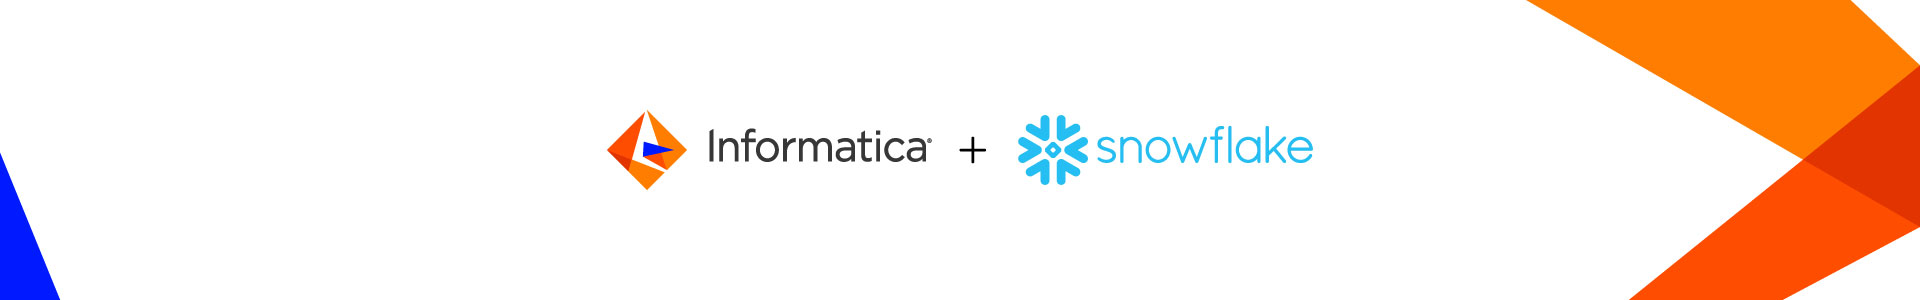 Informatica + Snowflake: Unleash the power of trusted, timely, data-driven decisions